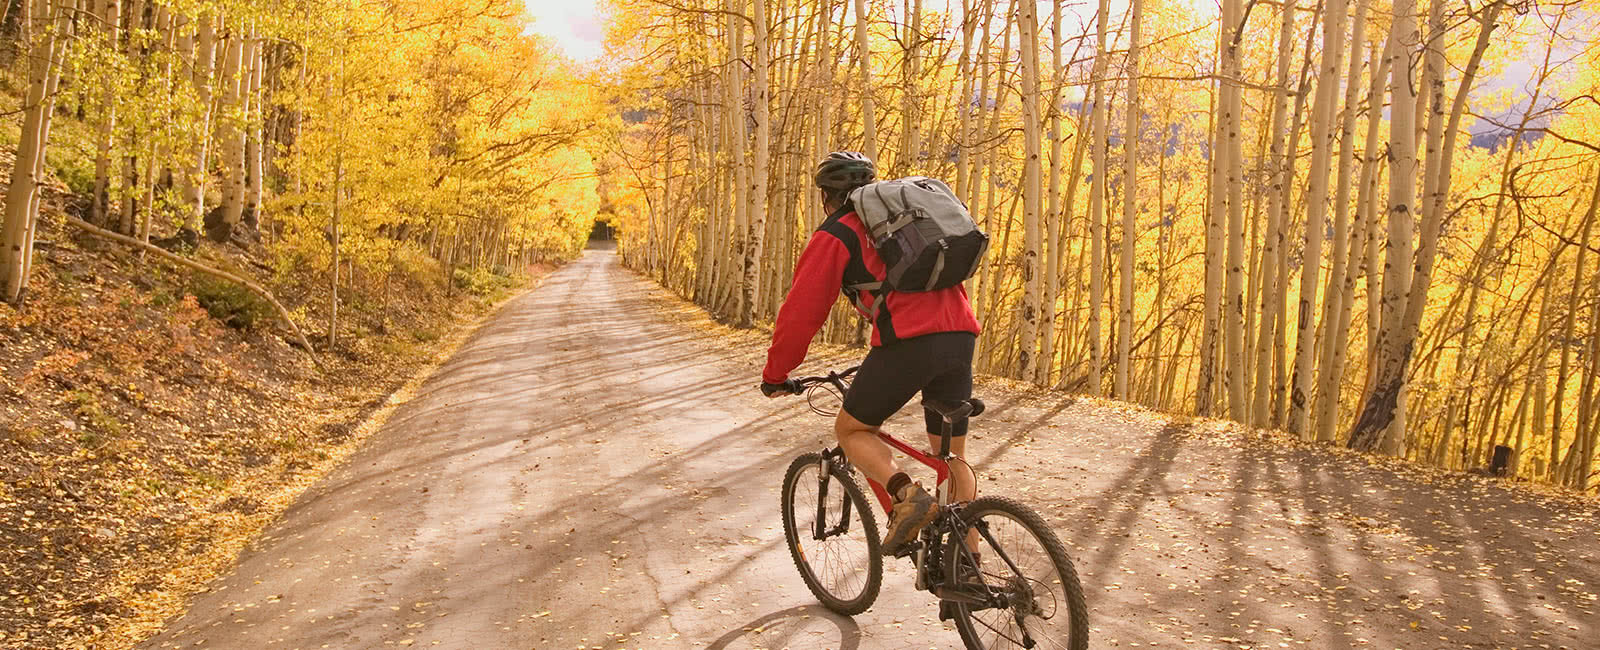 Enjoy mountain biking on a Colorado vacation with Hilton Grand Vacations